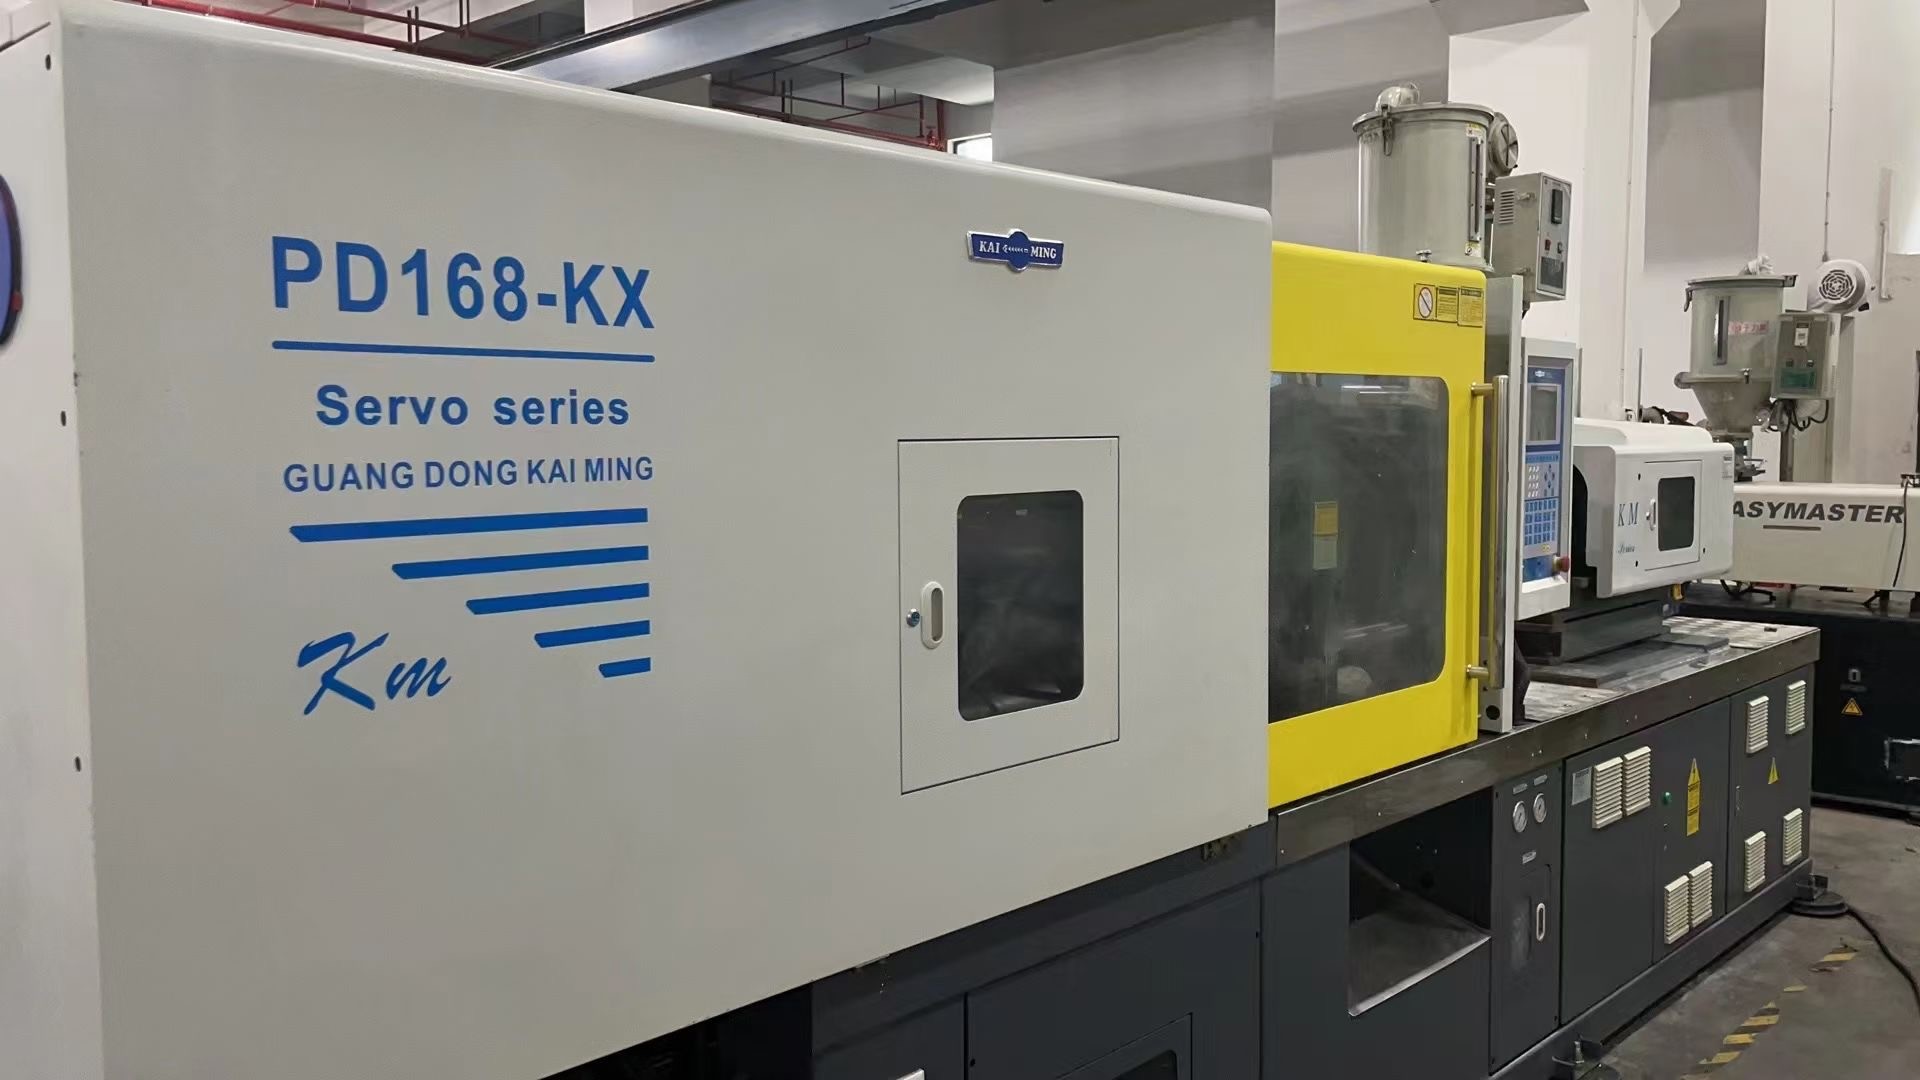  Hydraulic Thin Wall Injection Molding Machine Sevor Motor Used Kaiming PD168-KX Manufactures